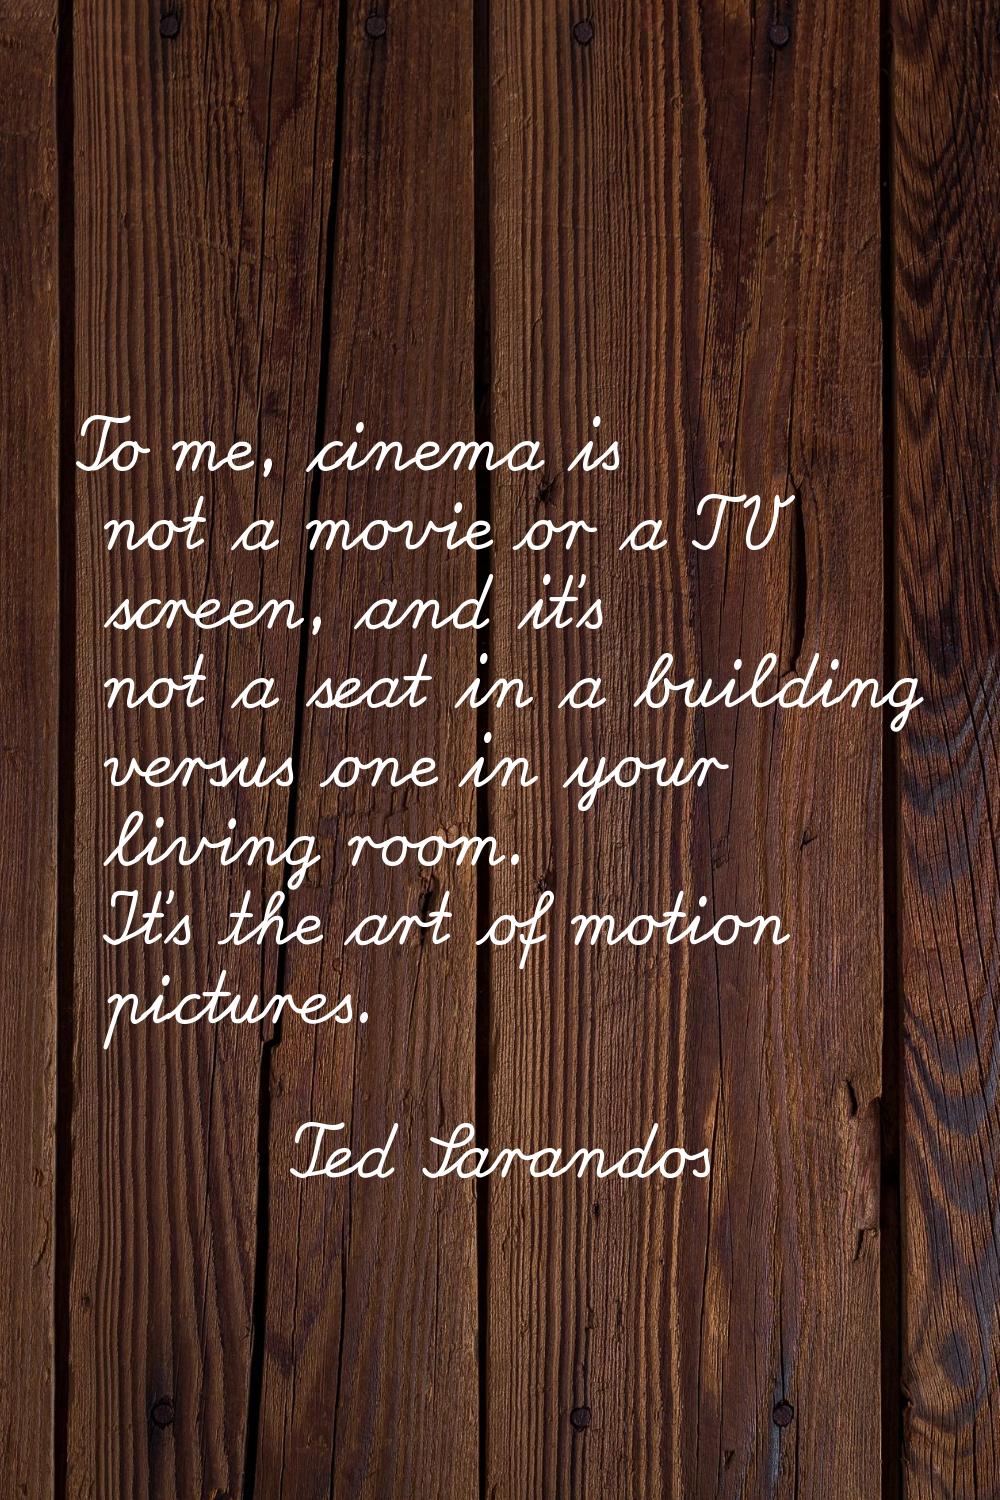 To me, cinema is not a movie or a TV screen, and it's not a seat in a building versus one in your l